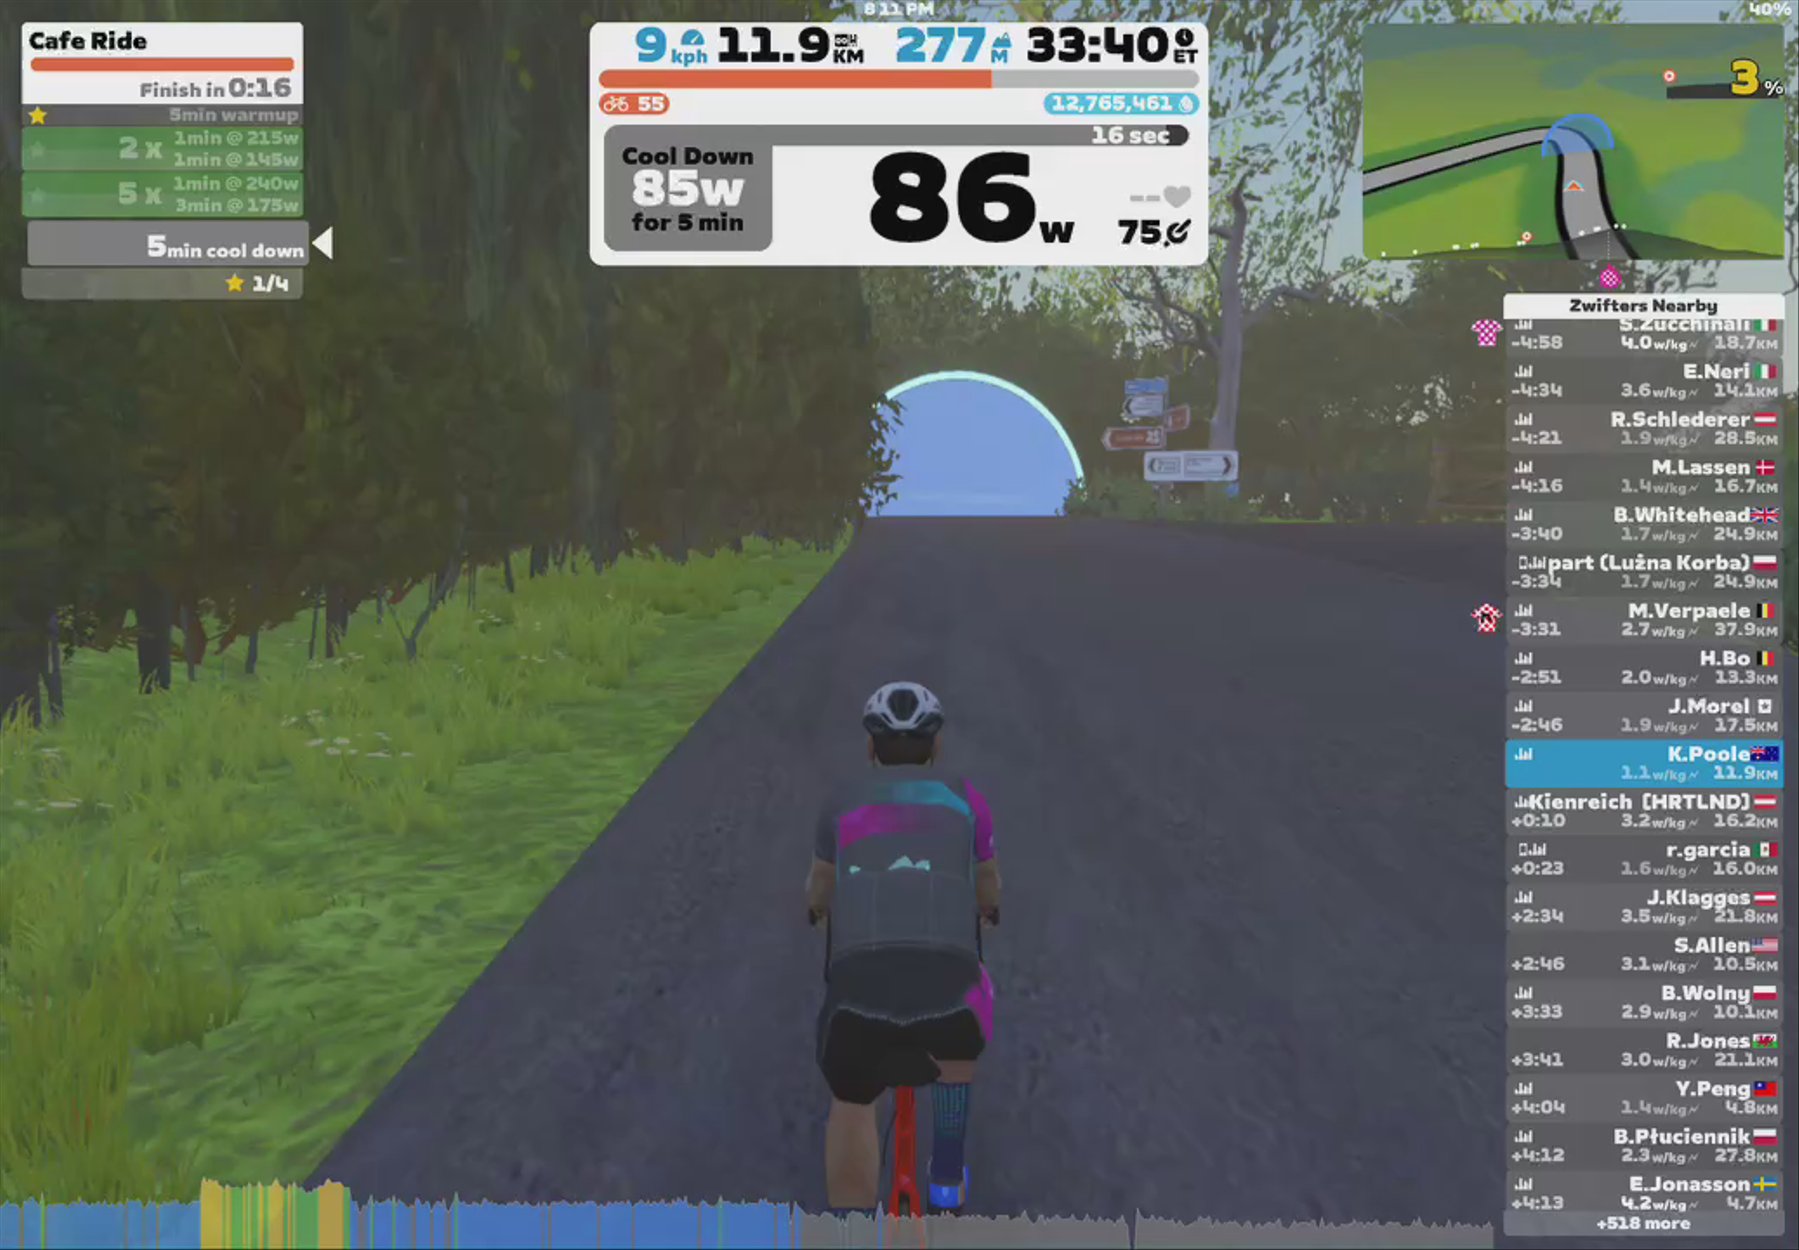 Zwift - INEOS Grenadiers Virtual Training Camp | The Cafe Ride in London